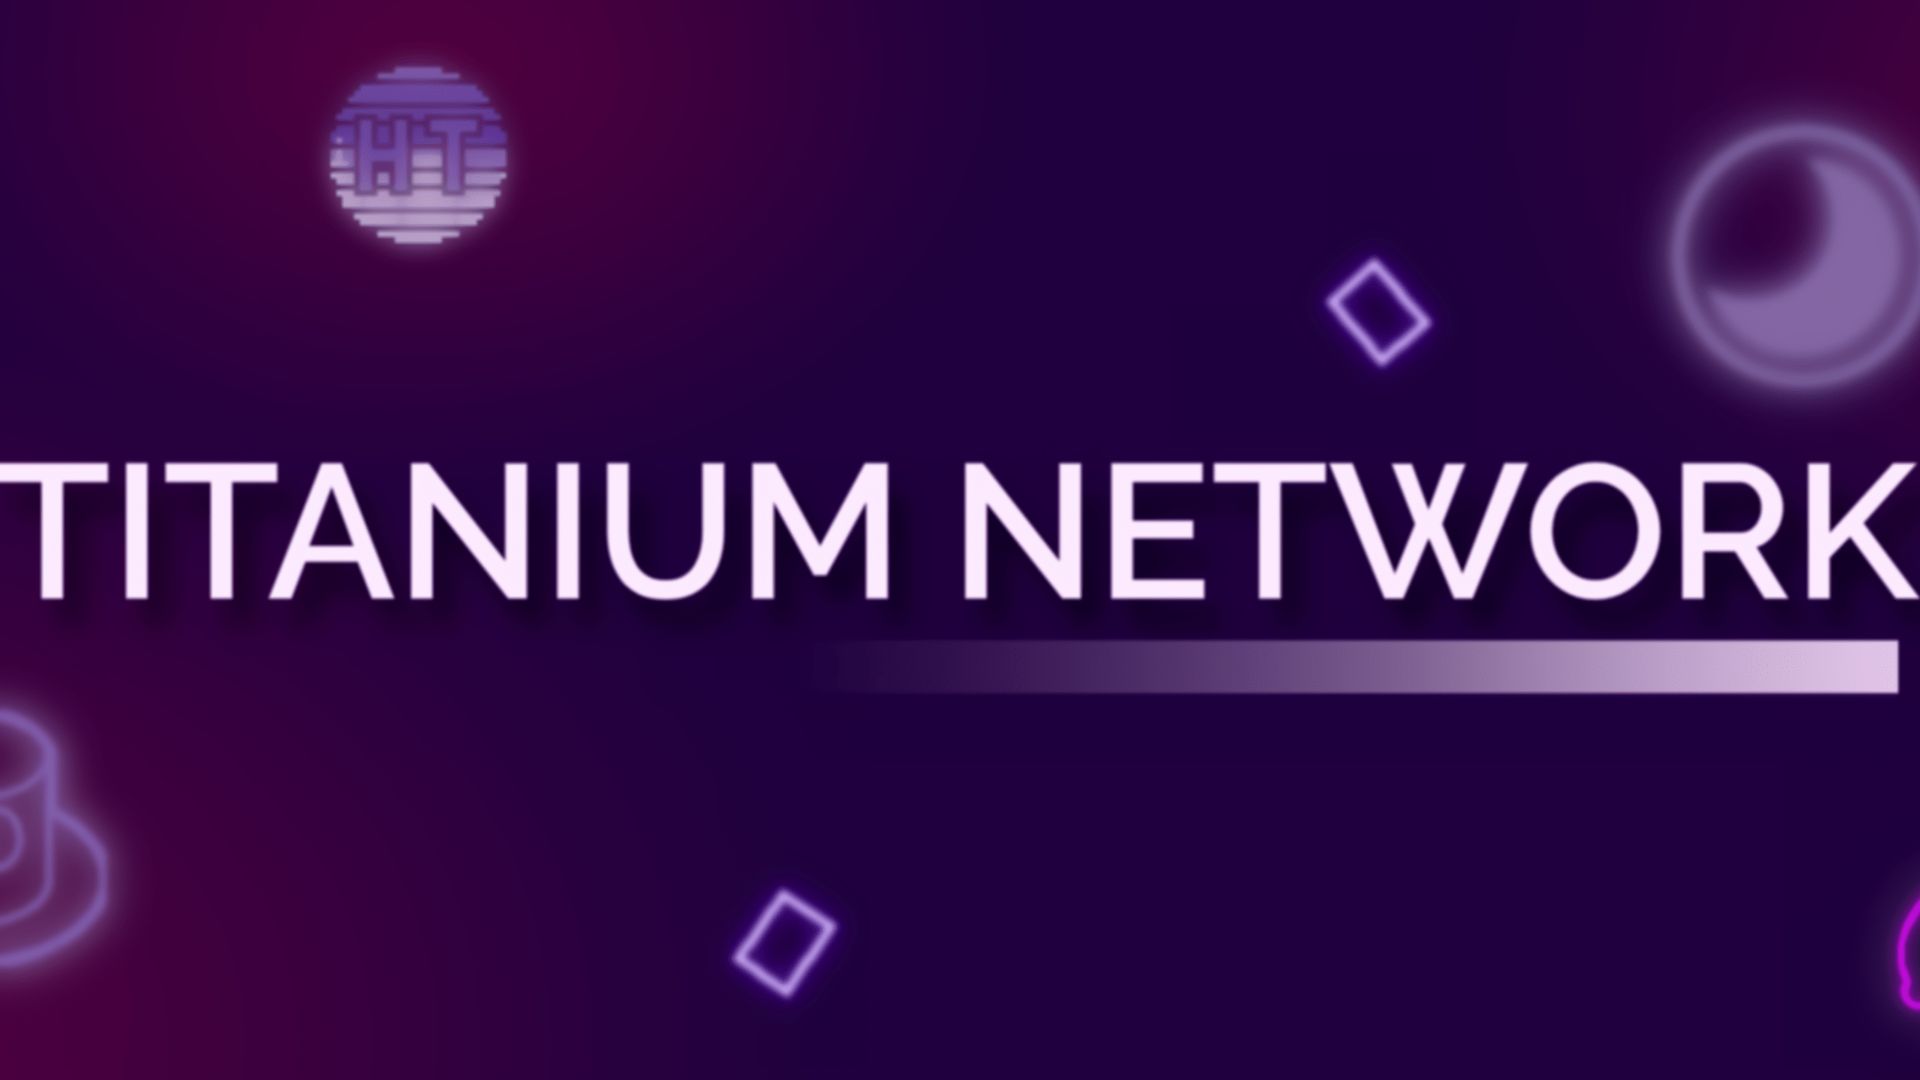 Titanium Network Unblocked - Unleashing The Full Potential Of A Powerful Network